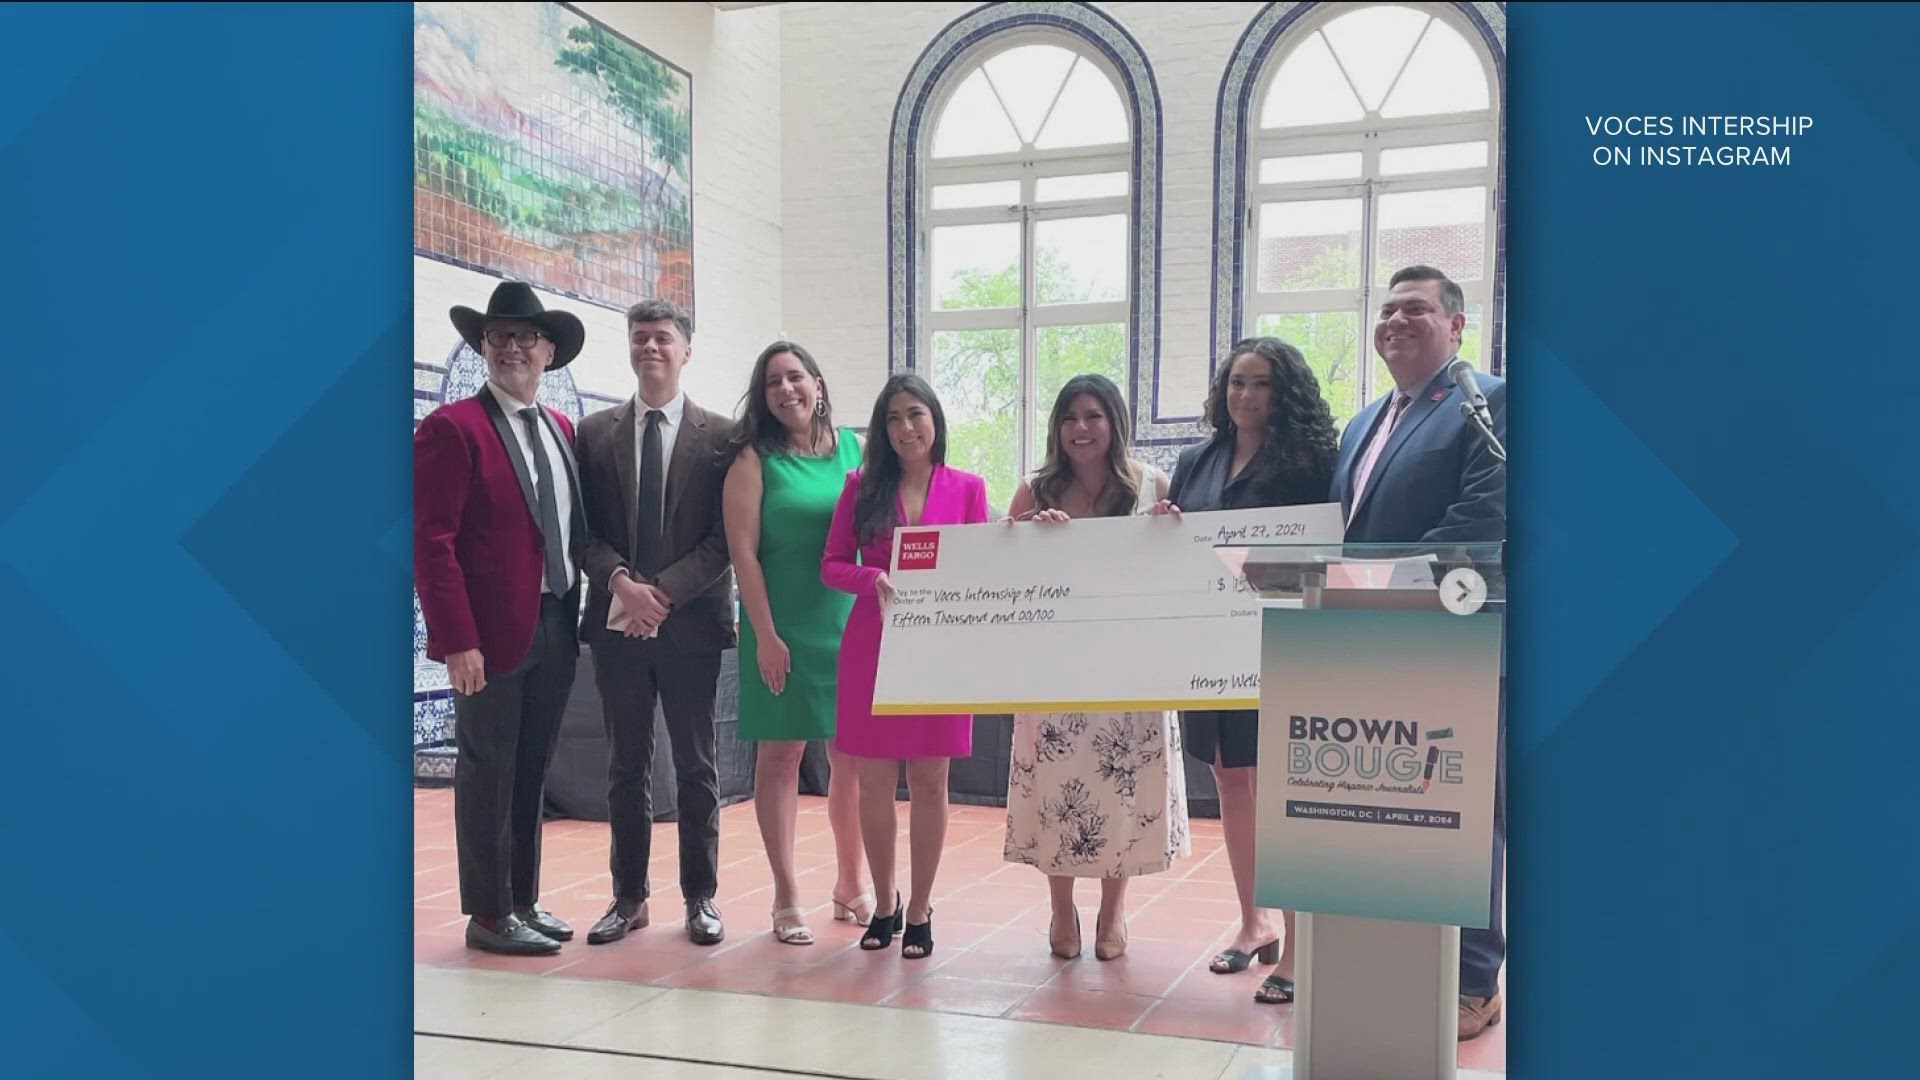 During a trip to the nation's capital, Voces Internship of Idaho received a $15,000 grant that will help more young Latino Idahoans get into journalism.